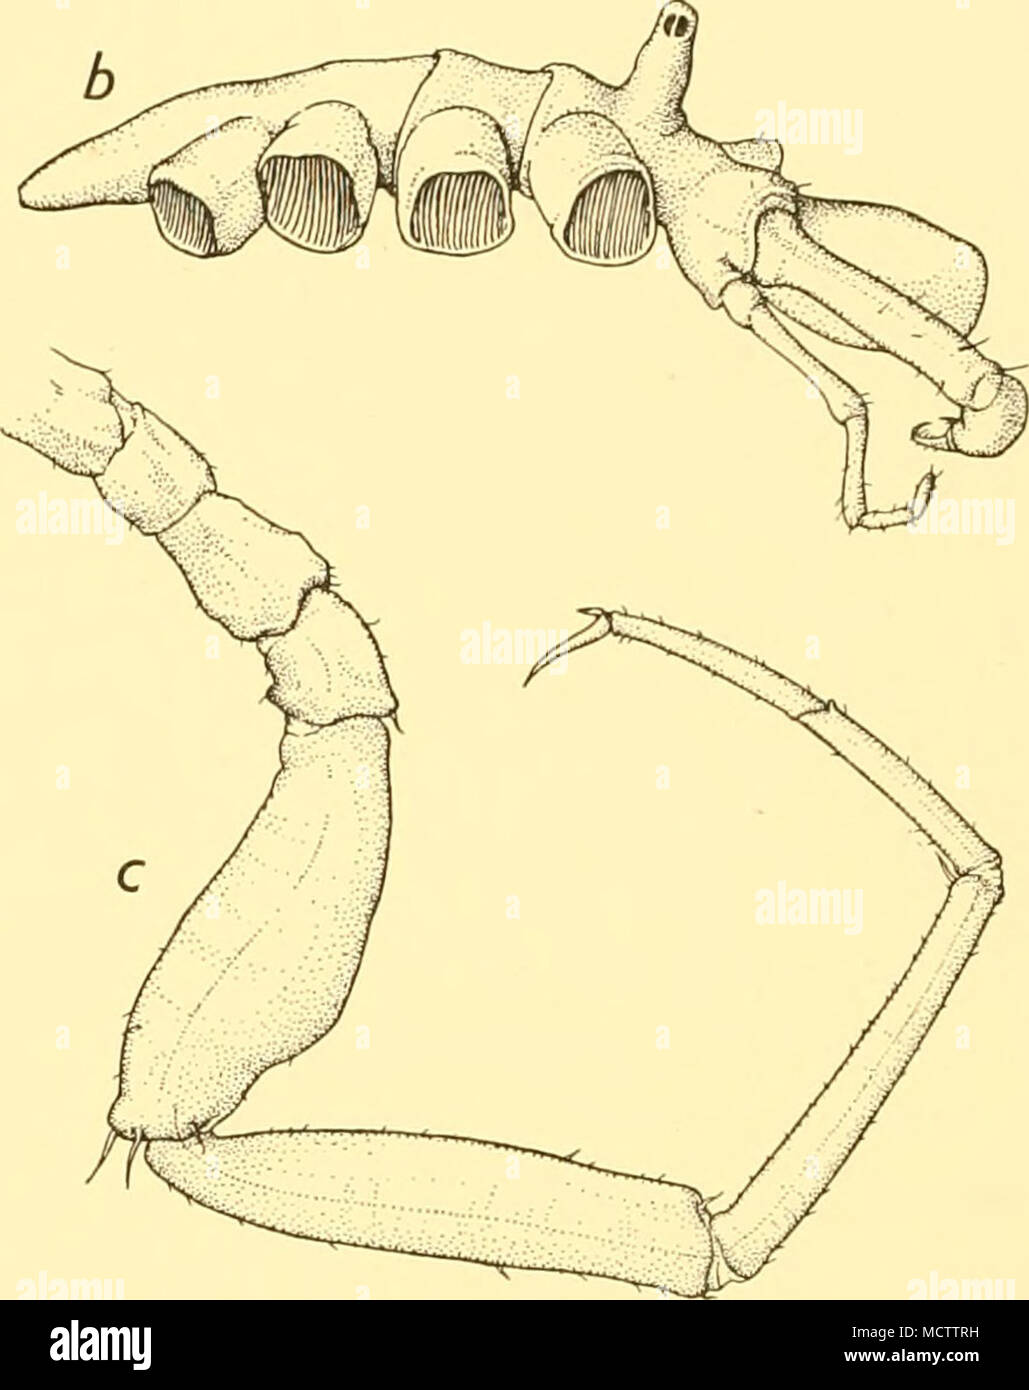 . Fig. 30. Nymphon neumayri, n.sp.: a. Holotype. Dorsal view of body with chelophores and palps. b. Holotype. Lateral view of body, with chelophore and palp. c. Third leg of female. Measurements {mm.) Length of proboscis ... Diameter of proboscis Length of trunk Length of cephalic segment Width of cephalic lobes Width across second lateral processes Length of abdomen Length of scape Length of chela Third right leg: First coxa ... Second coxa Third coxa ... Femur First tibia ... Second tibia Tarsus Propodus ... Claw Holotype ? 1-4 1-8 i-o 0-9 4-0 4-4 1-8 2-0 1-8 2-3 3-3 3-4 2-1 2'0 2-2 2-2 1-6  Stock Photo